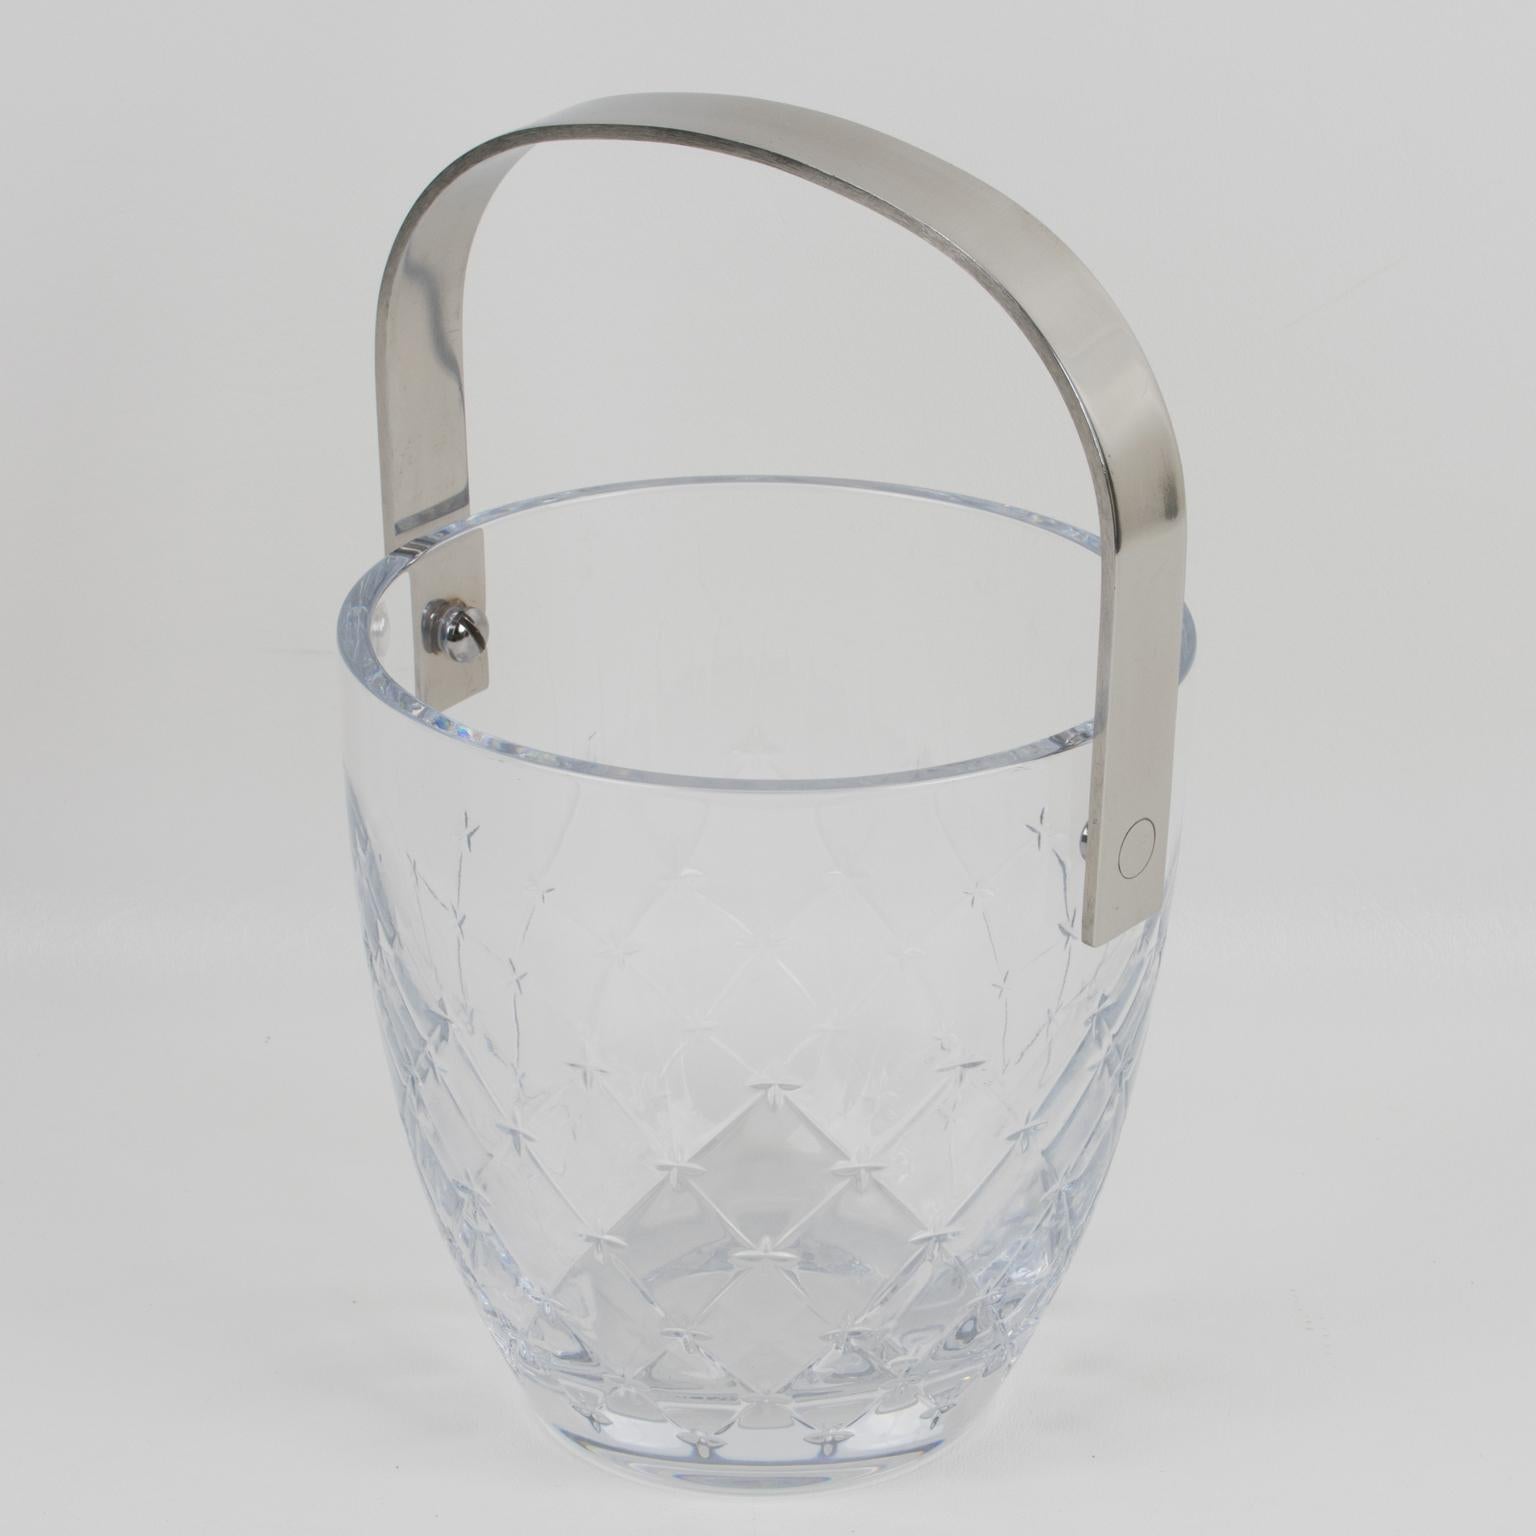 This elegant modernist ice bucket or wine cooler was designed for Christian Dior Home Collection in the 1990s. This sophisticated clear crystal ice bucket features an iconic fabric-like etched design with a tall high gloss stainless steel handle.